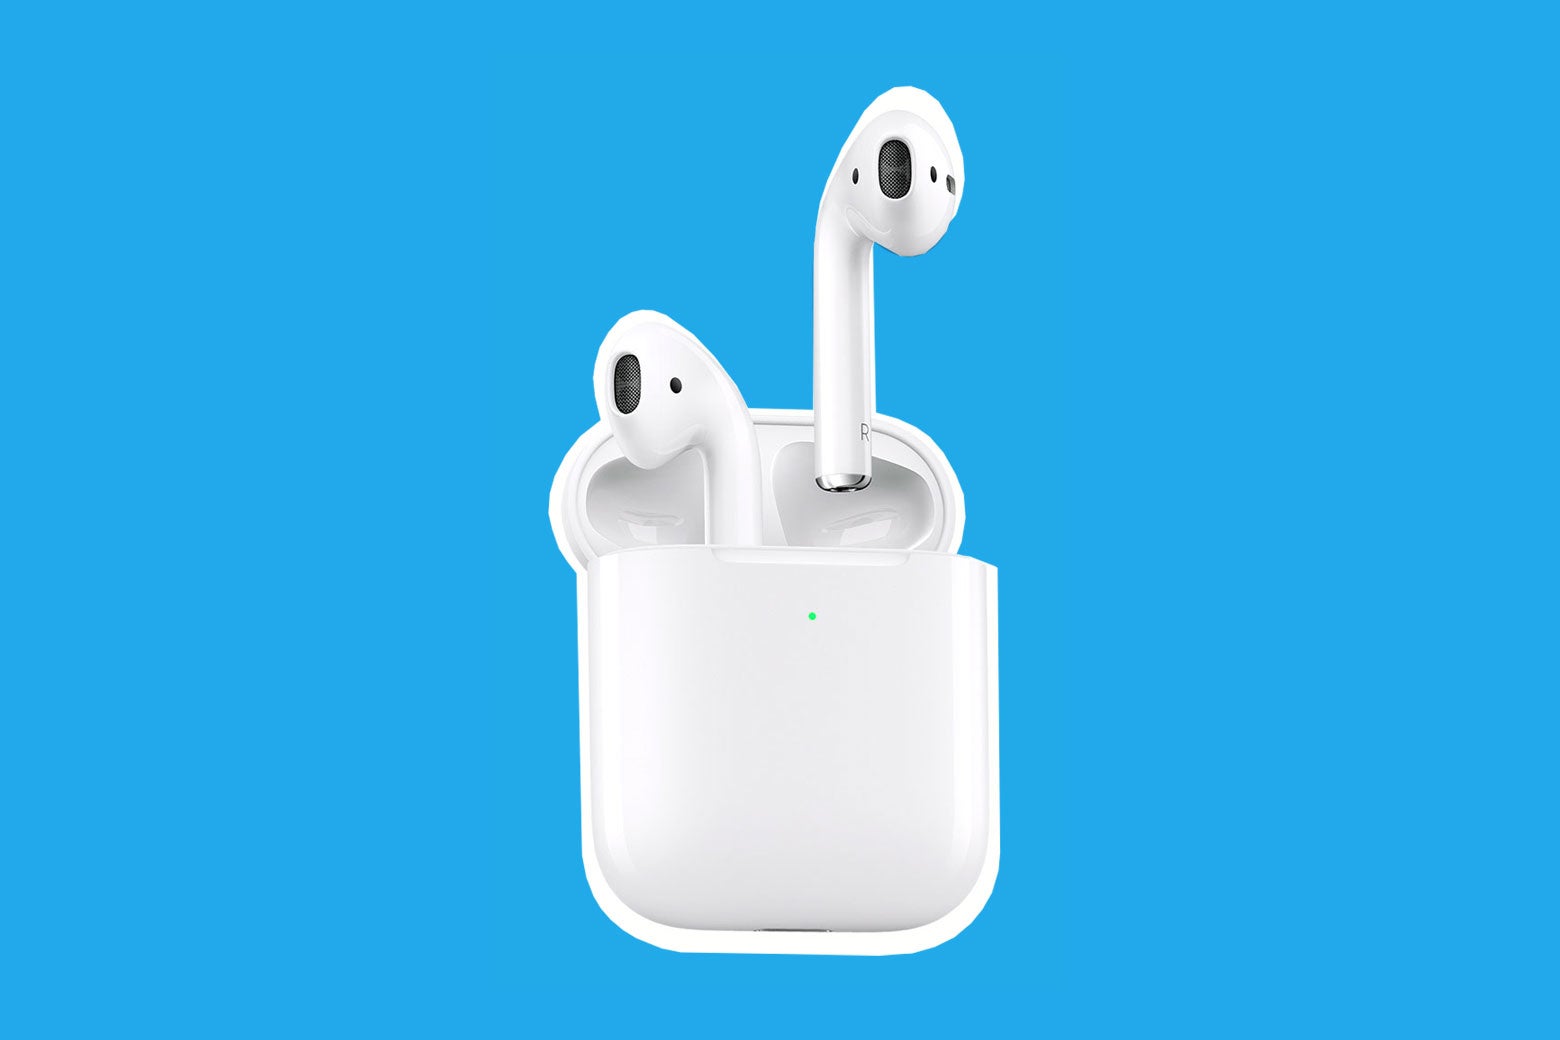 Introducing the next generation of AirPods - Apple